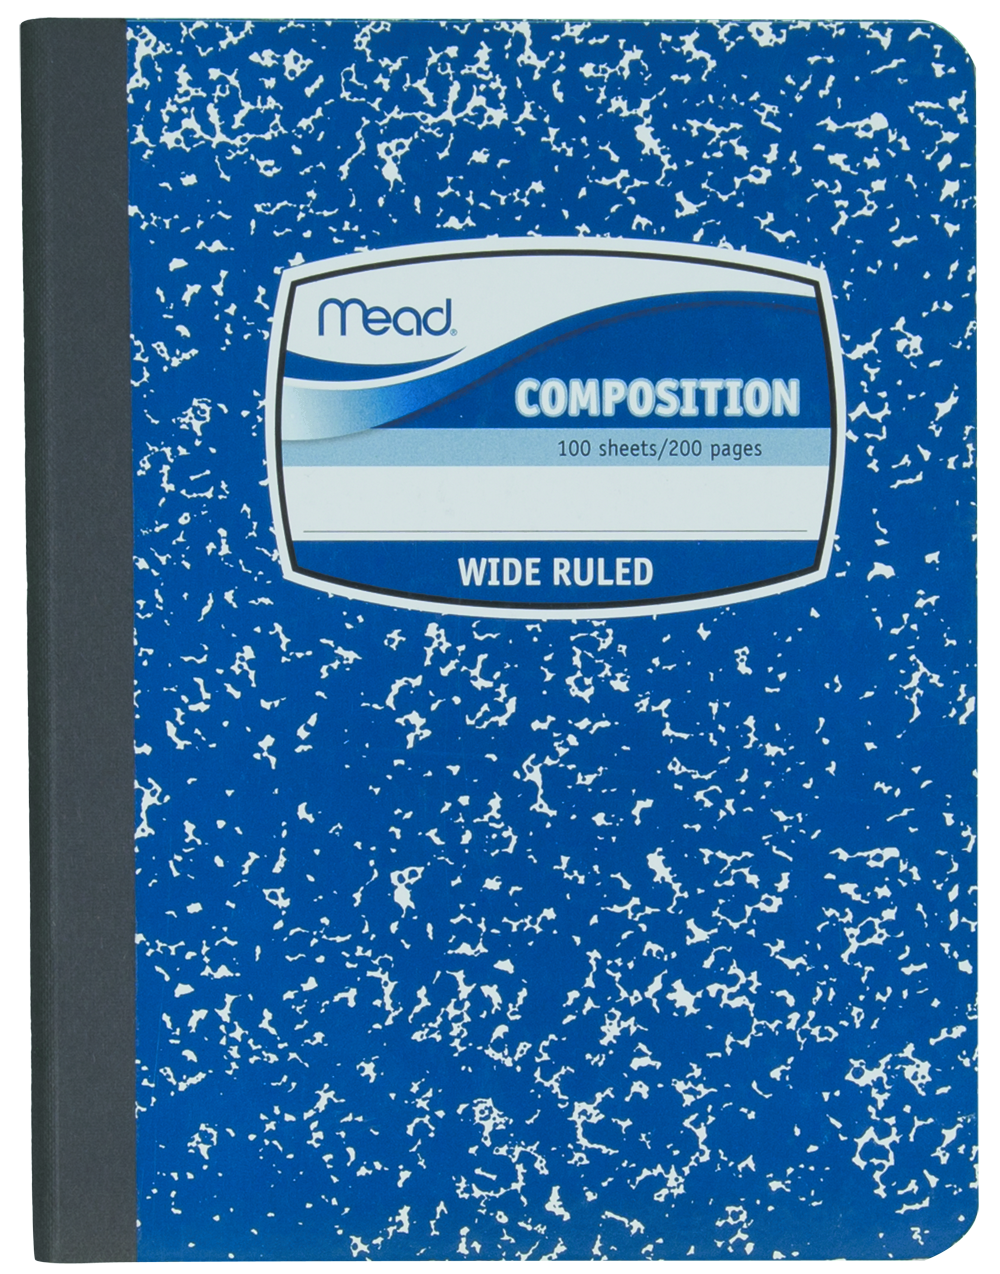 Composition Notebook Cover Clipart Mead Square Deal Composition